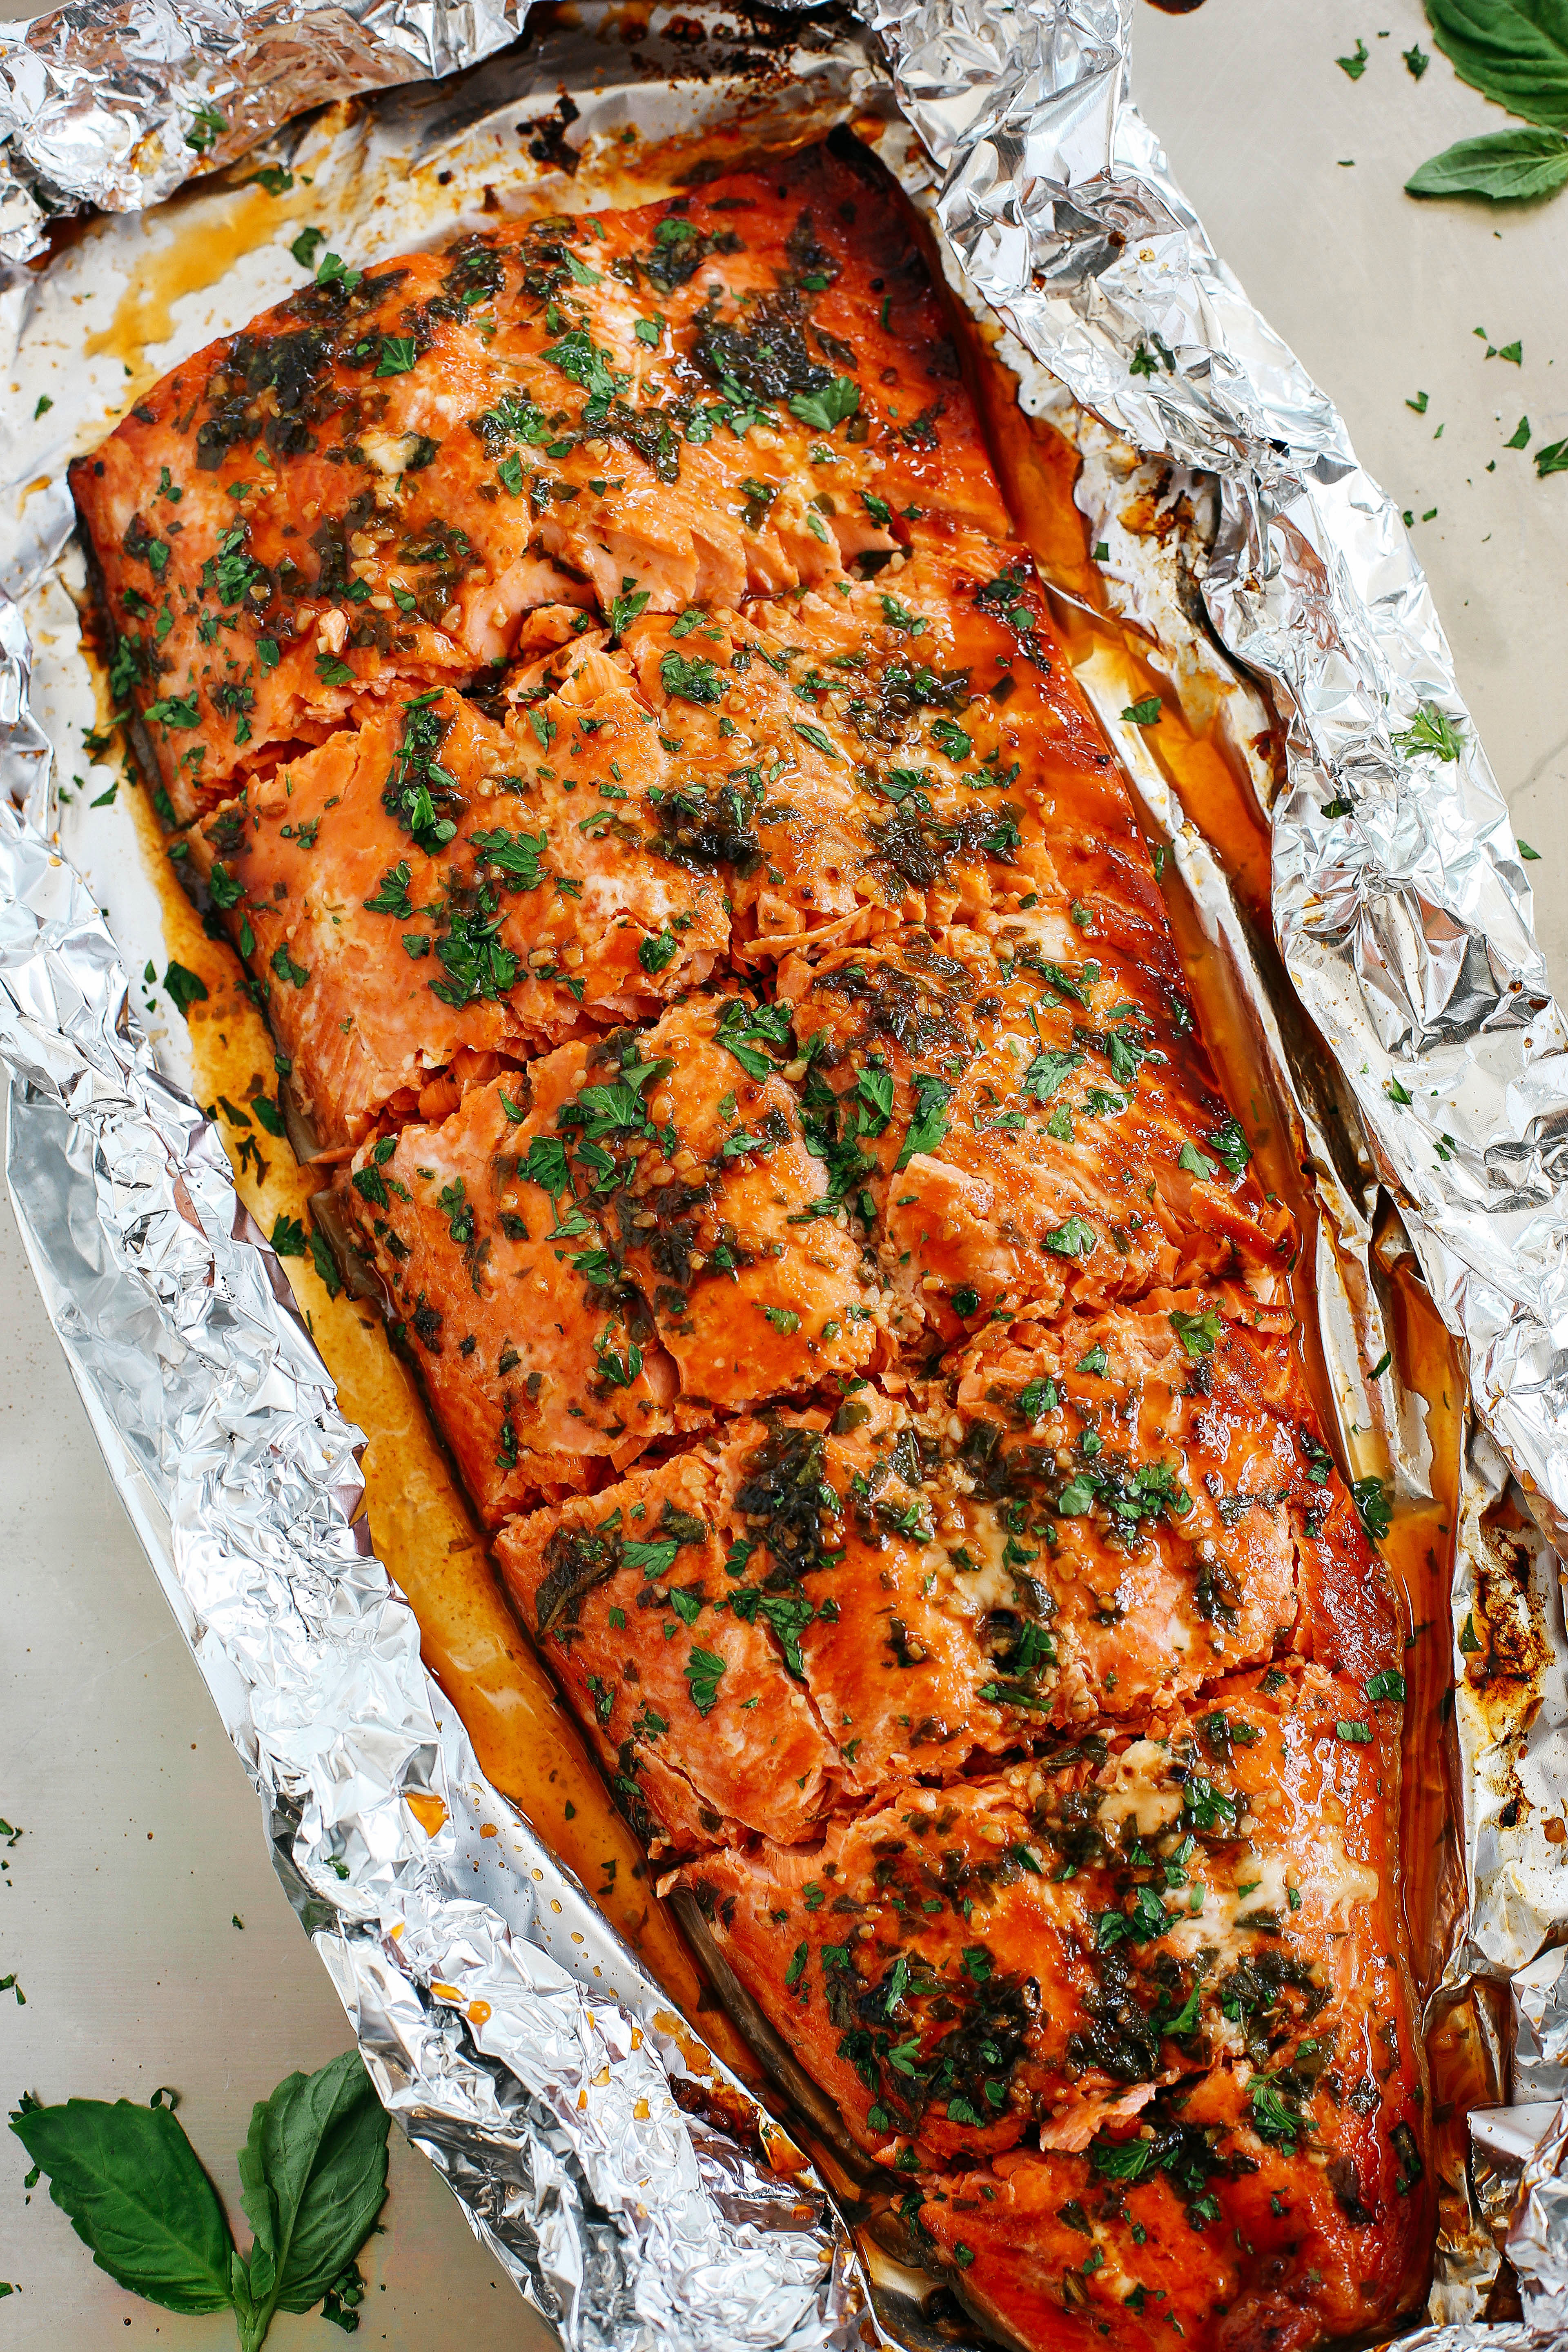 This delicious Ginger Basil Salmon in Foil is the perfect weeknight dinner that's healthy, easy to prepare, and ready in just 20 minutes!